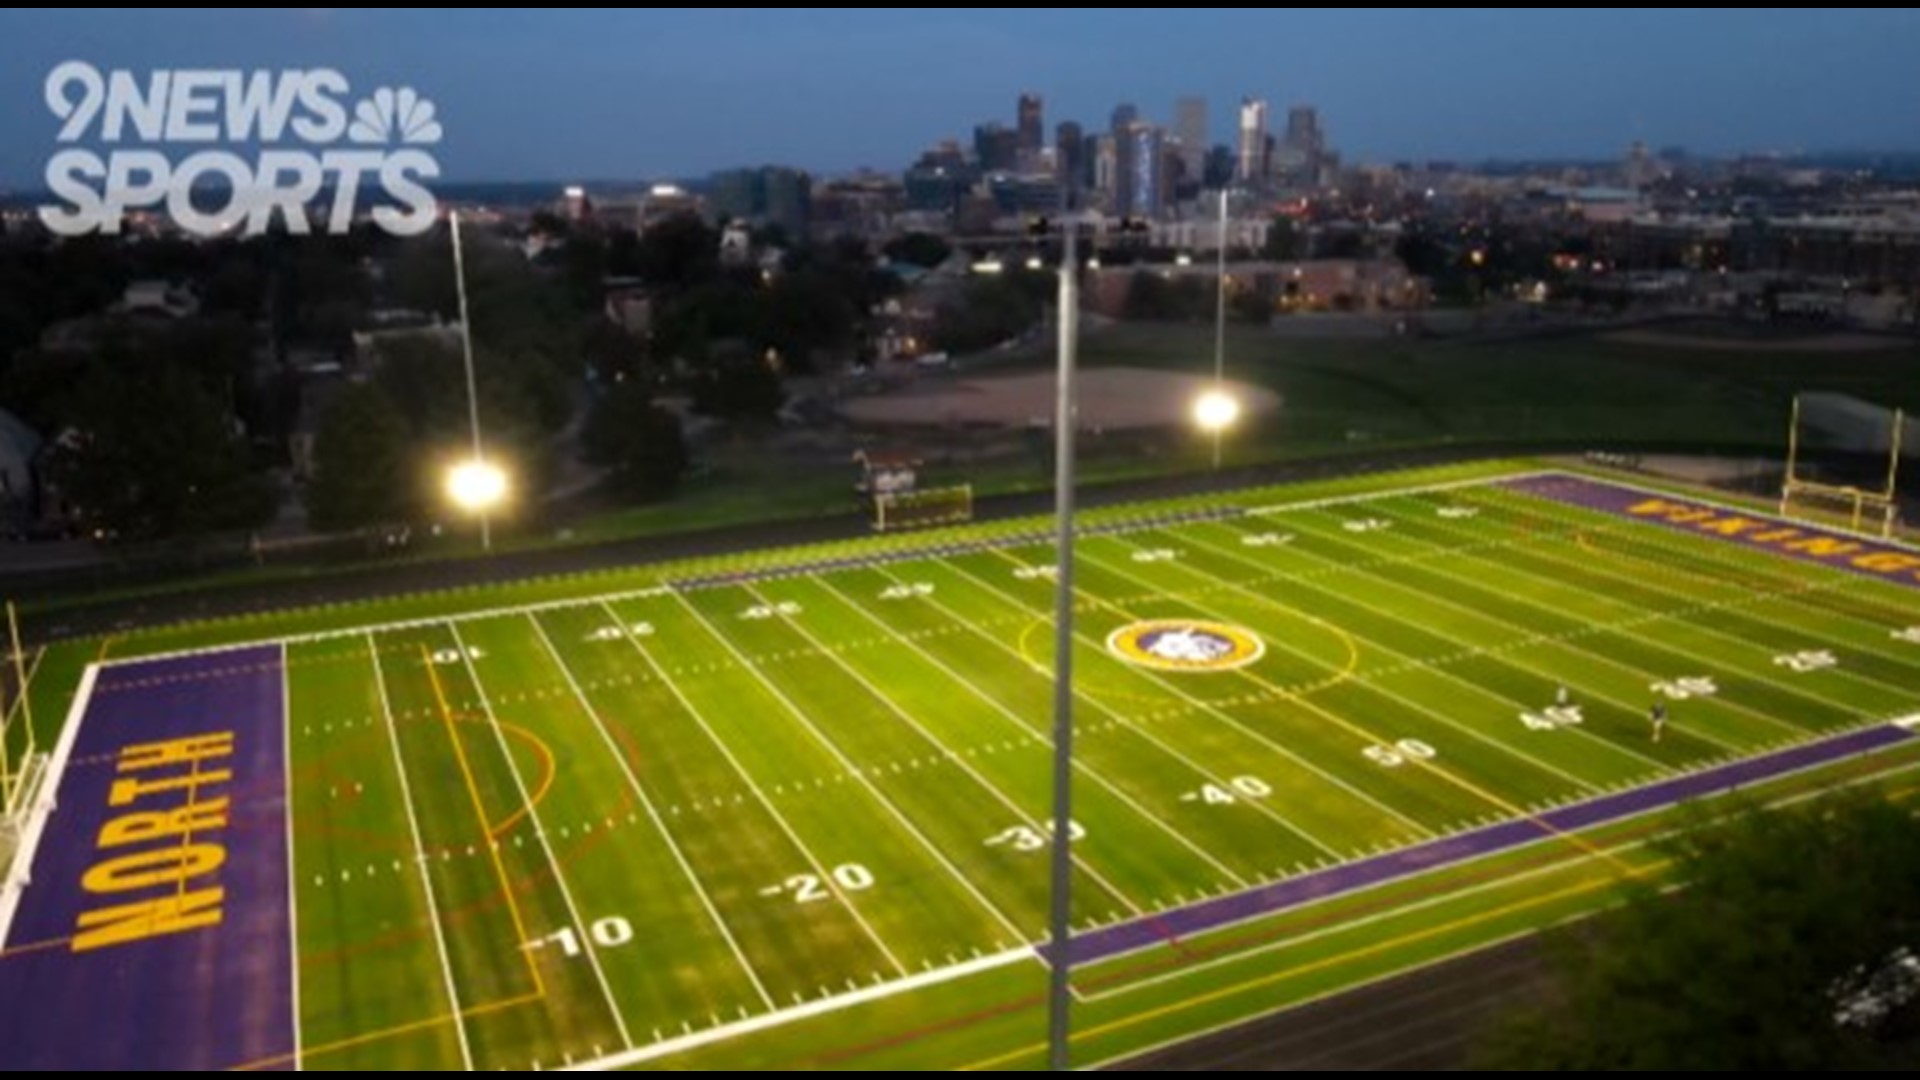 The Vikings welcomed recent renovations to their home turf this summer.